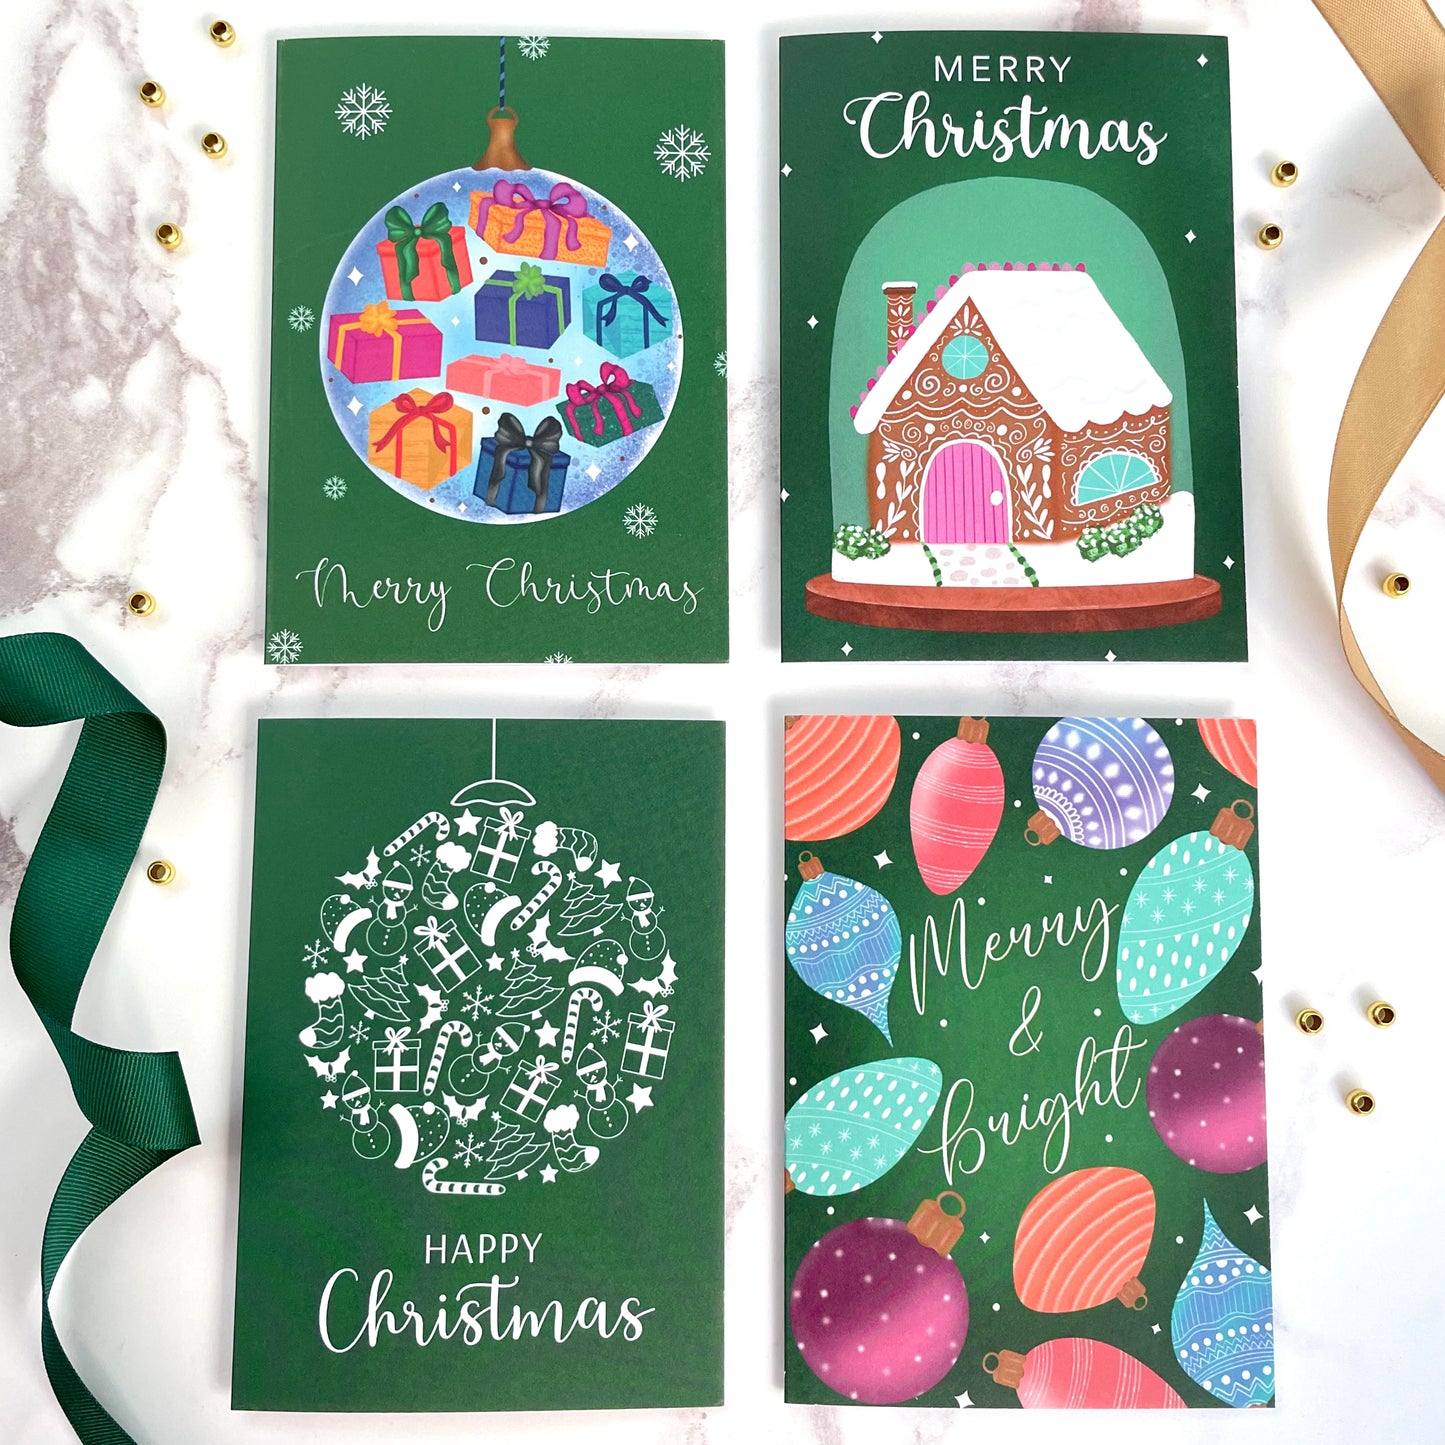 Green Christmas Cards (set of 4)